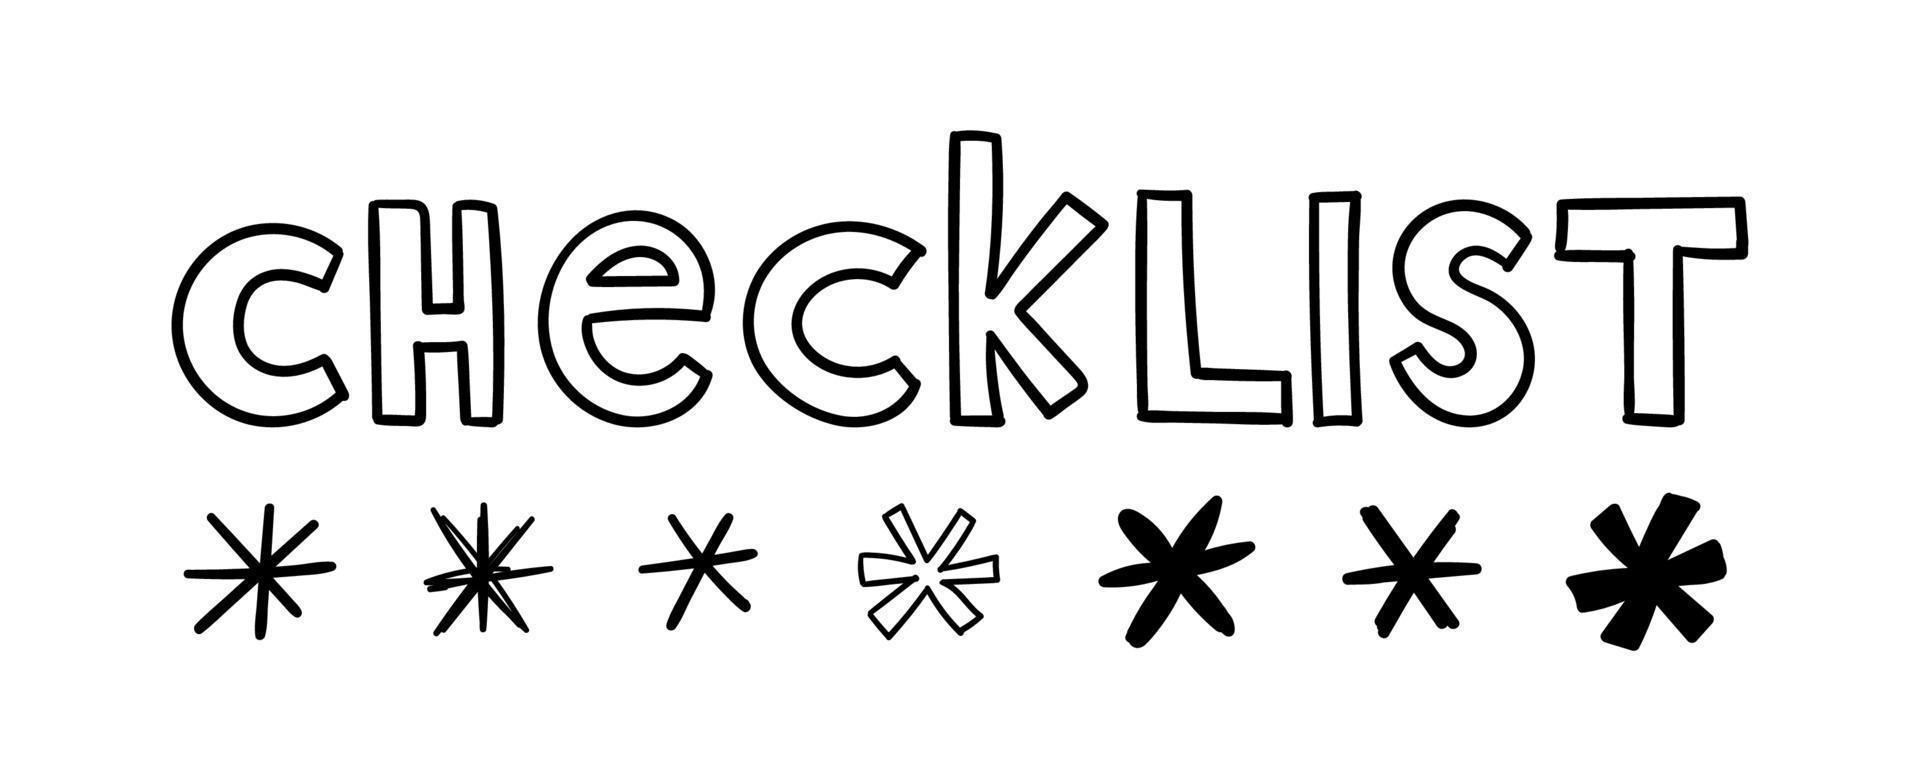 Doodle checklist with asterisks. Hand-drawn pencil. Vector illustration. Outline Scribble checklist text. Hand-drawn stars, empty letters, and handwritten words.